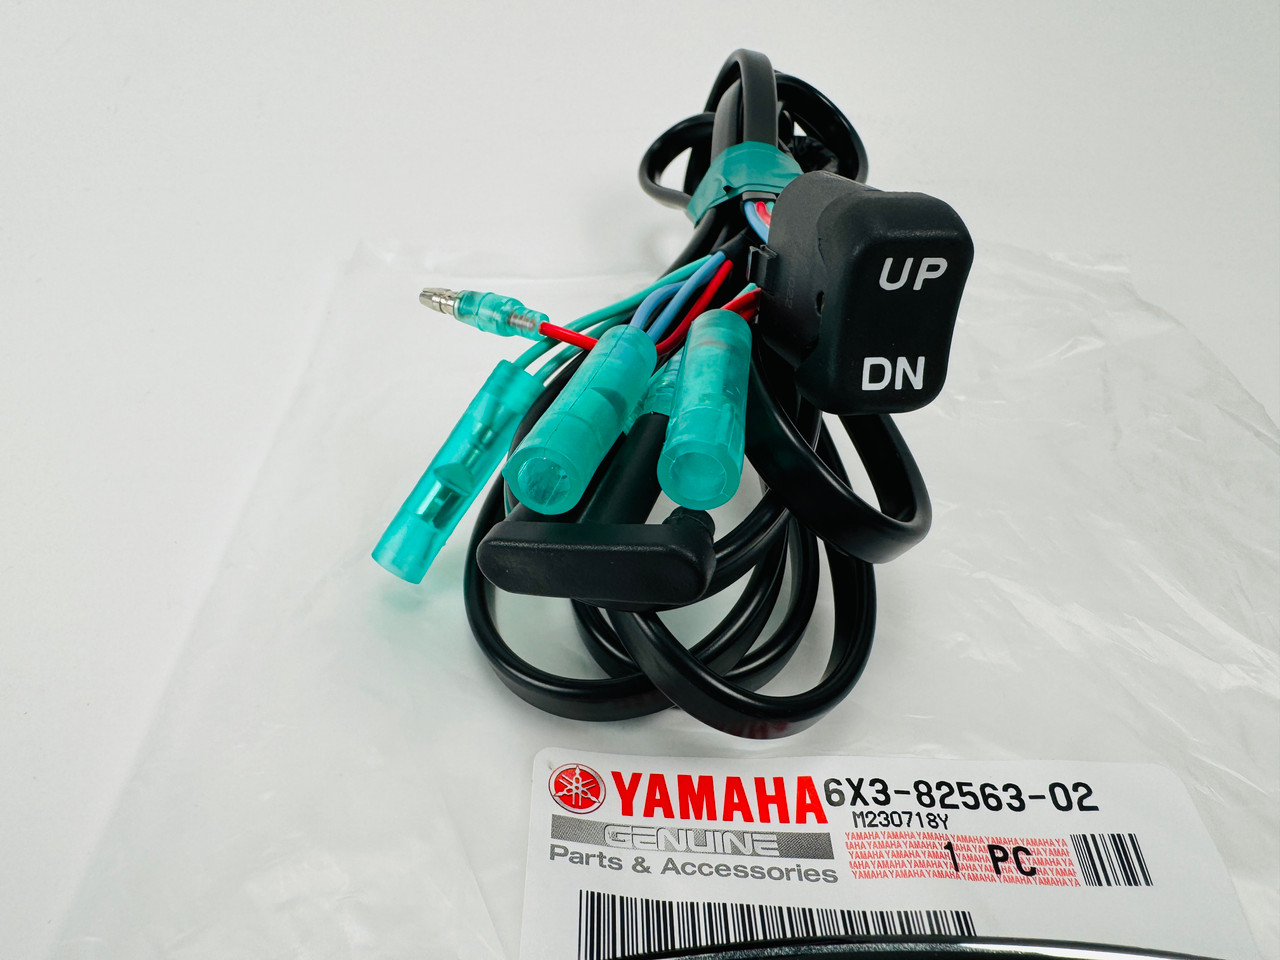 $106.99* GENUINE YAMAHA TRIM & TILT SWITCH 6X3-82563-02-00  *In Stock And Ready To Ship!